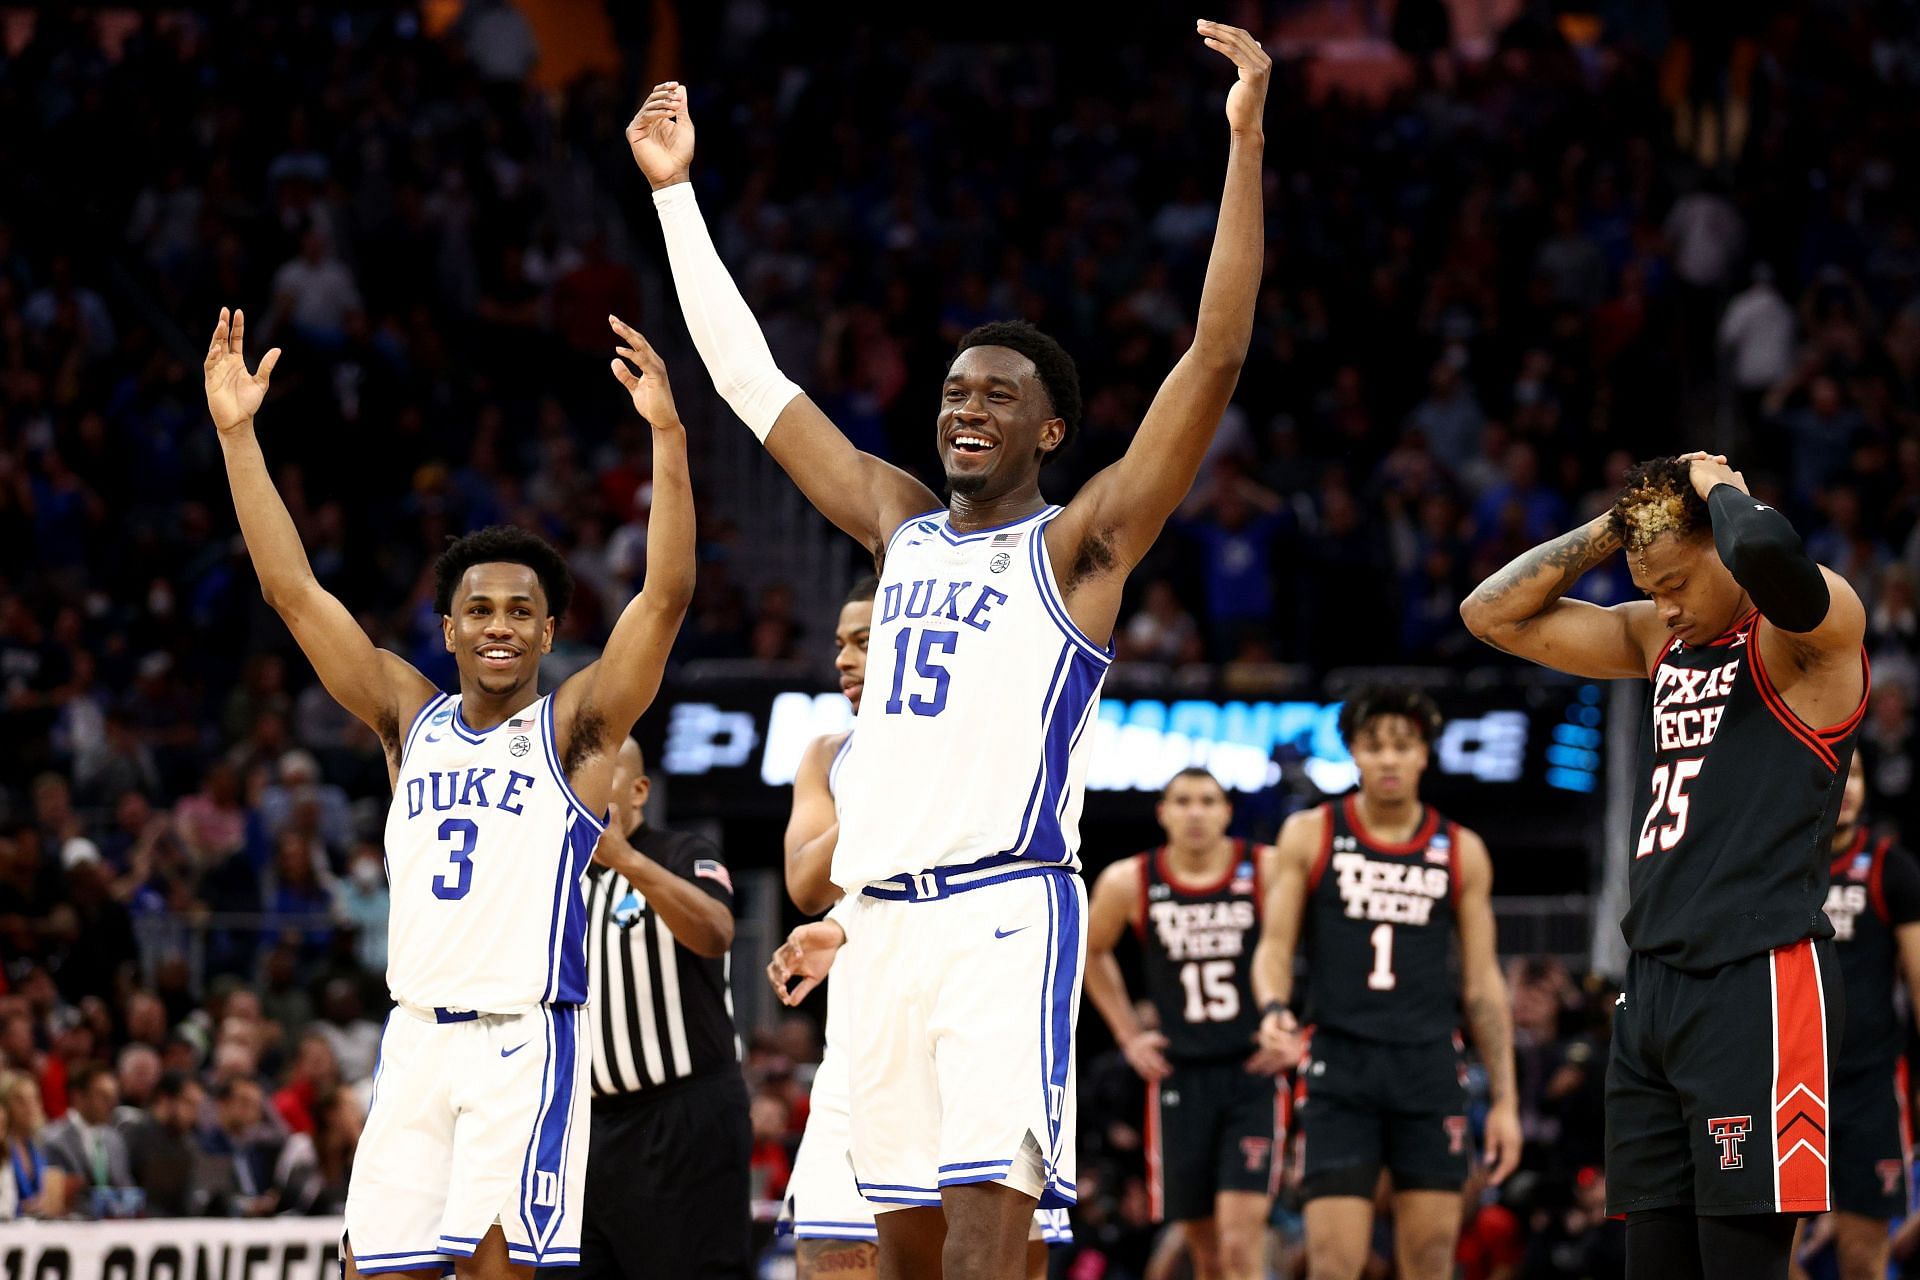 Duke Blue Devils are moving on after their win over Texas Tech